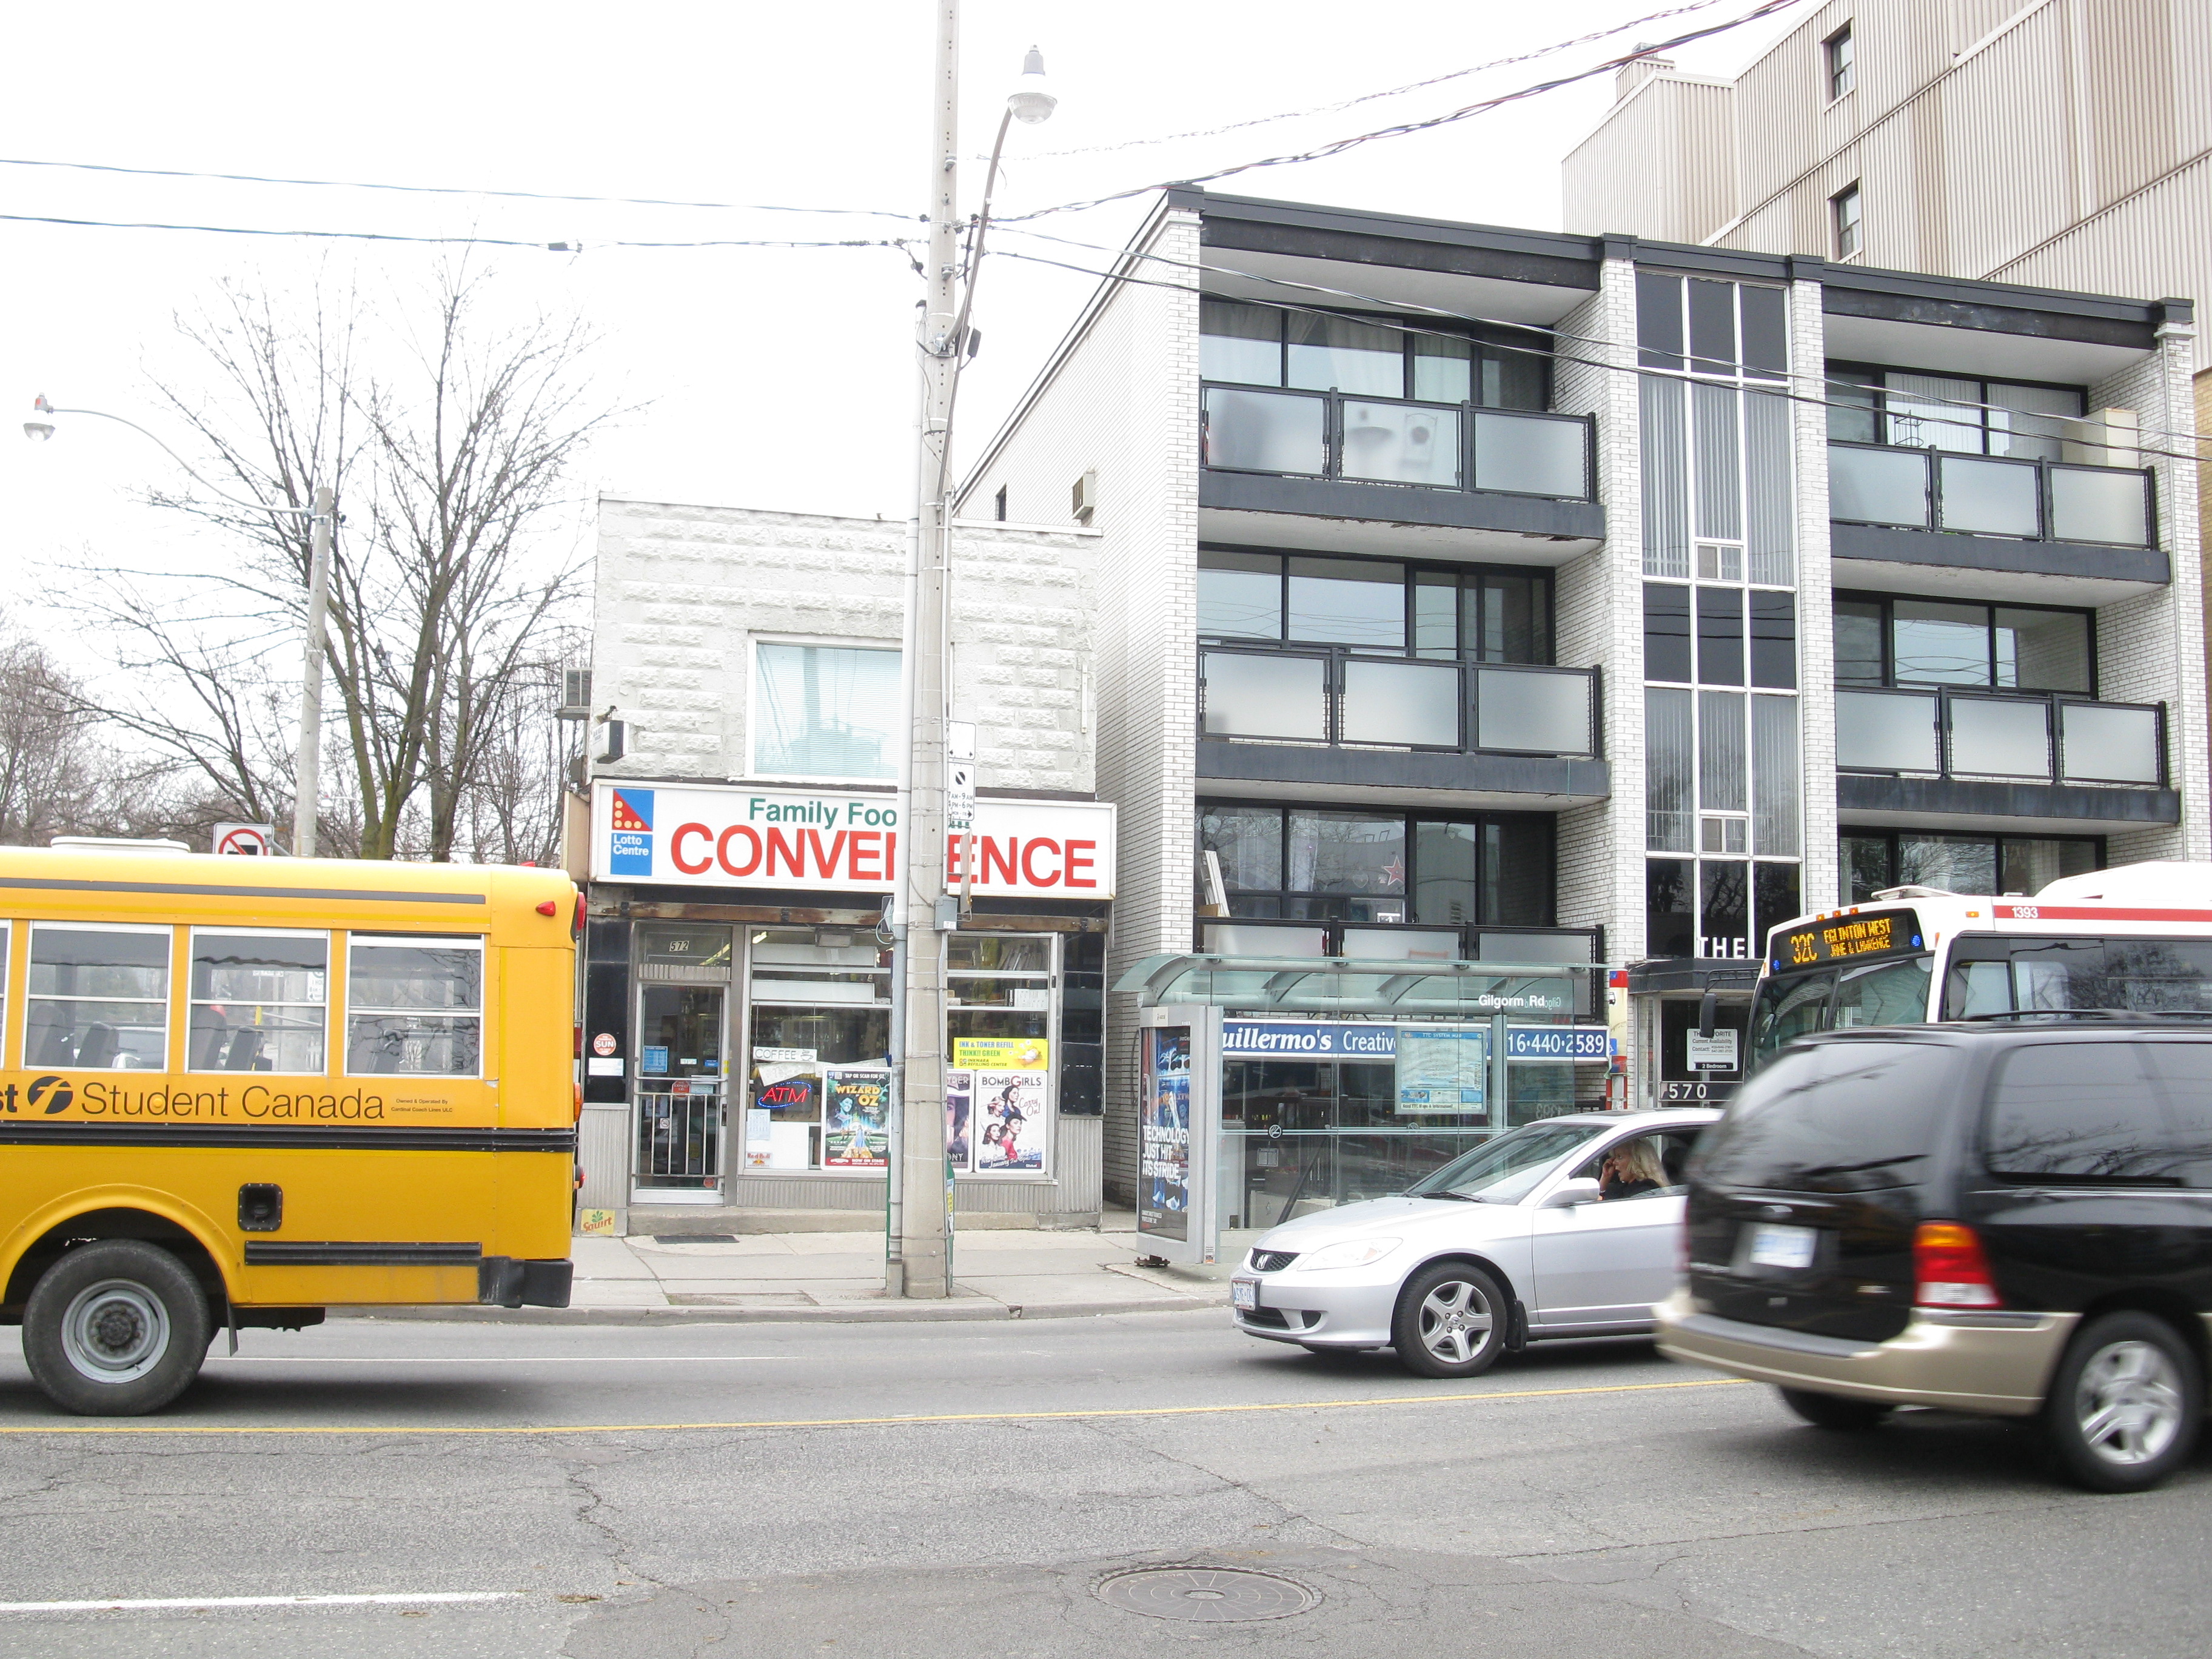 Intersection of chaplin and eglinton, 2013 04 09 -as photo